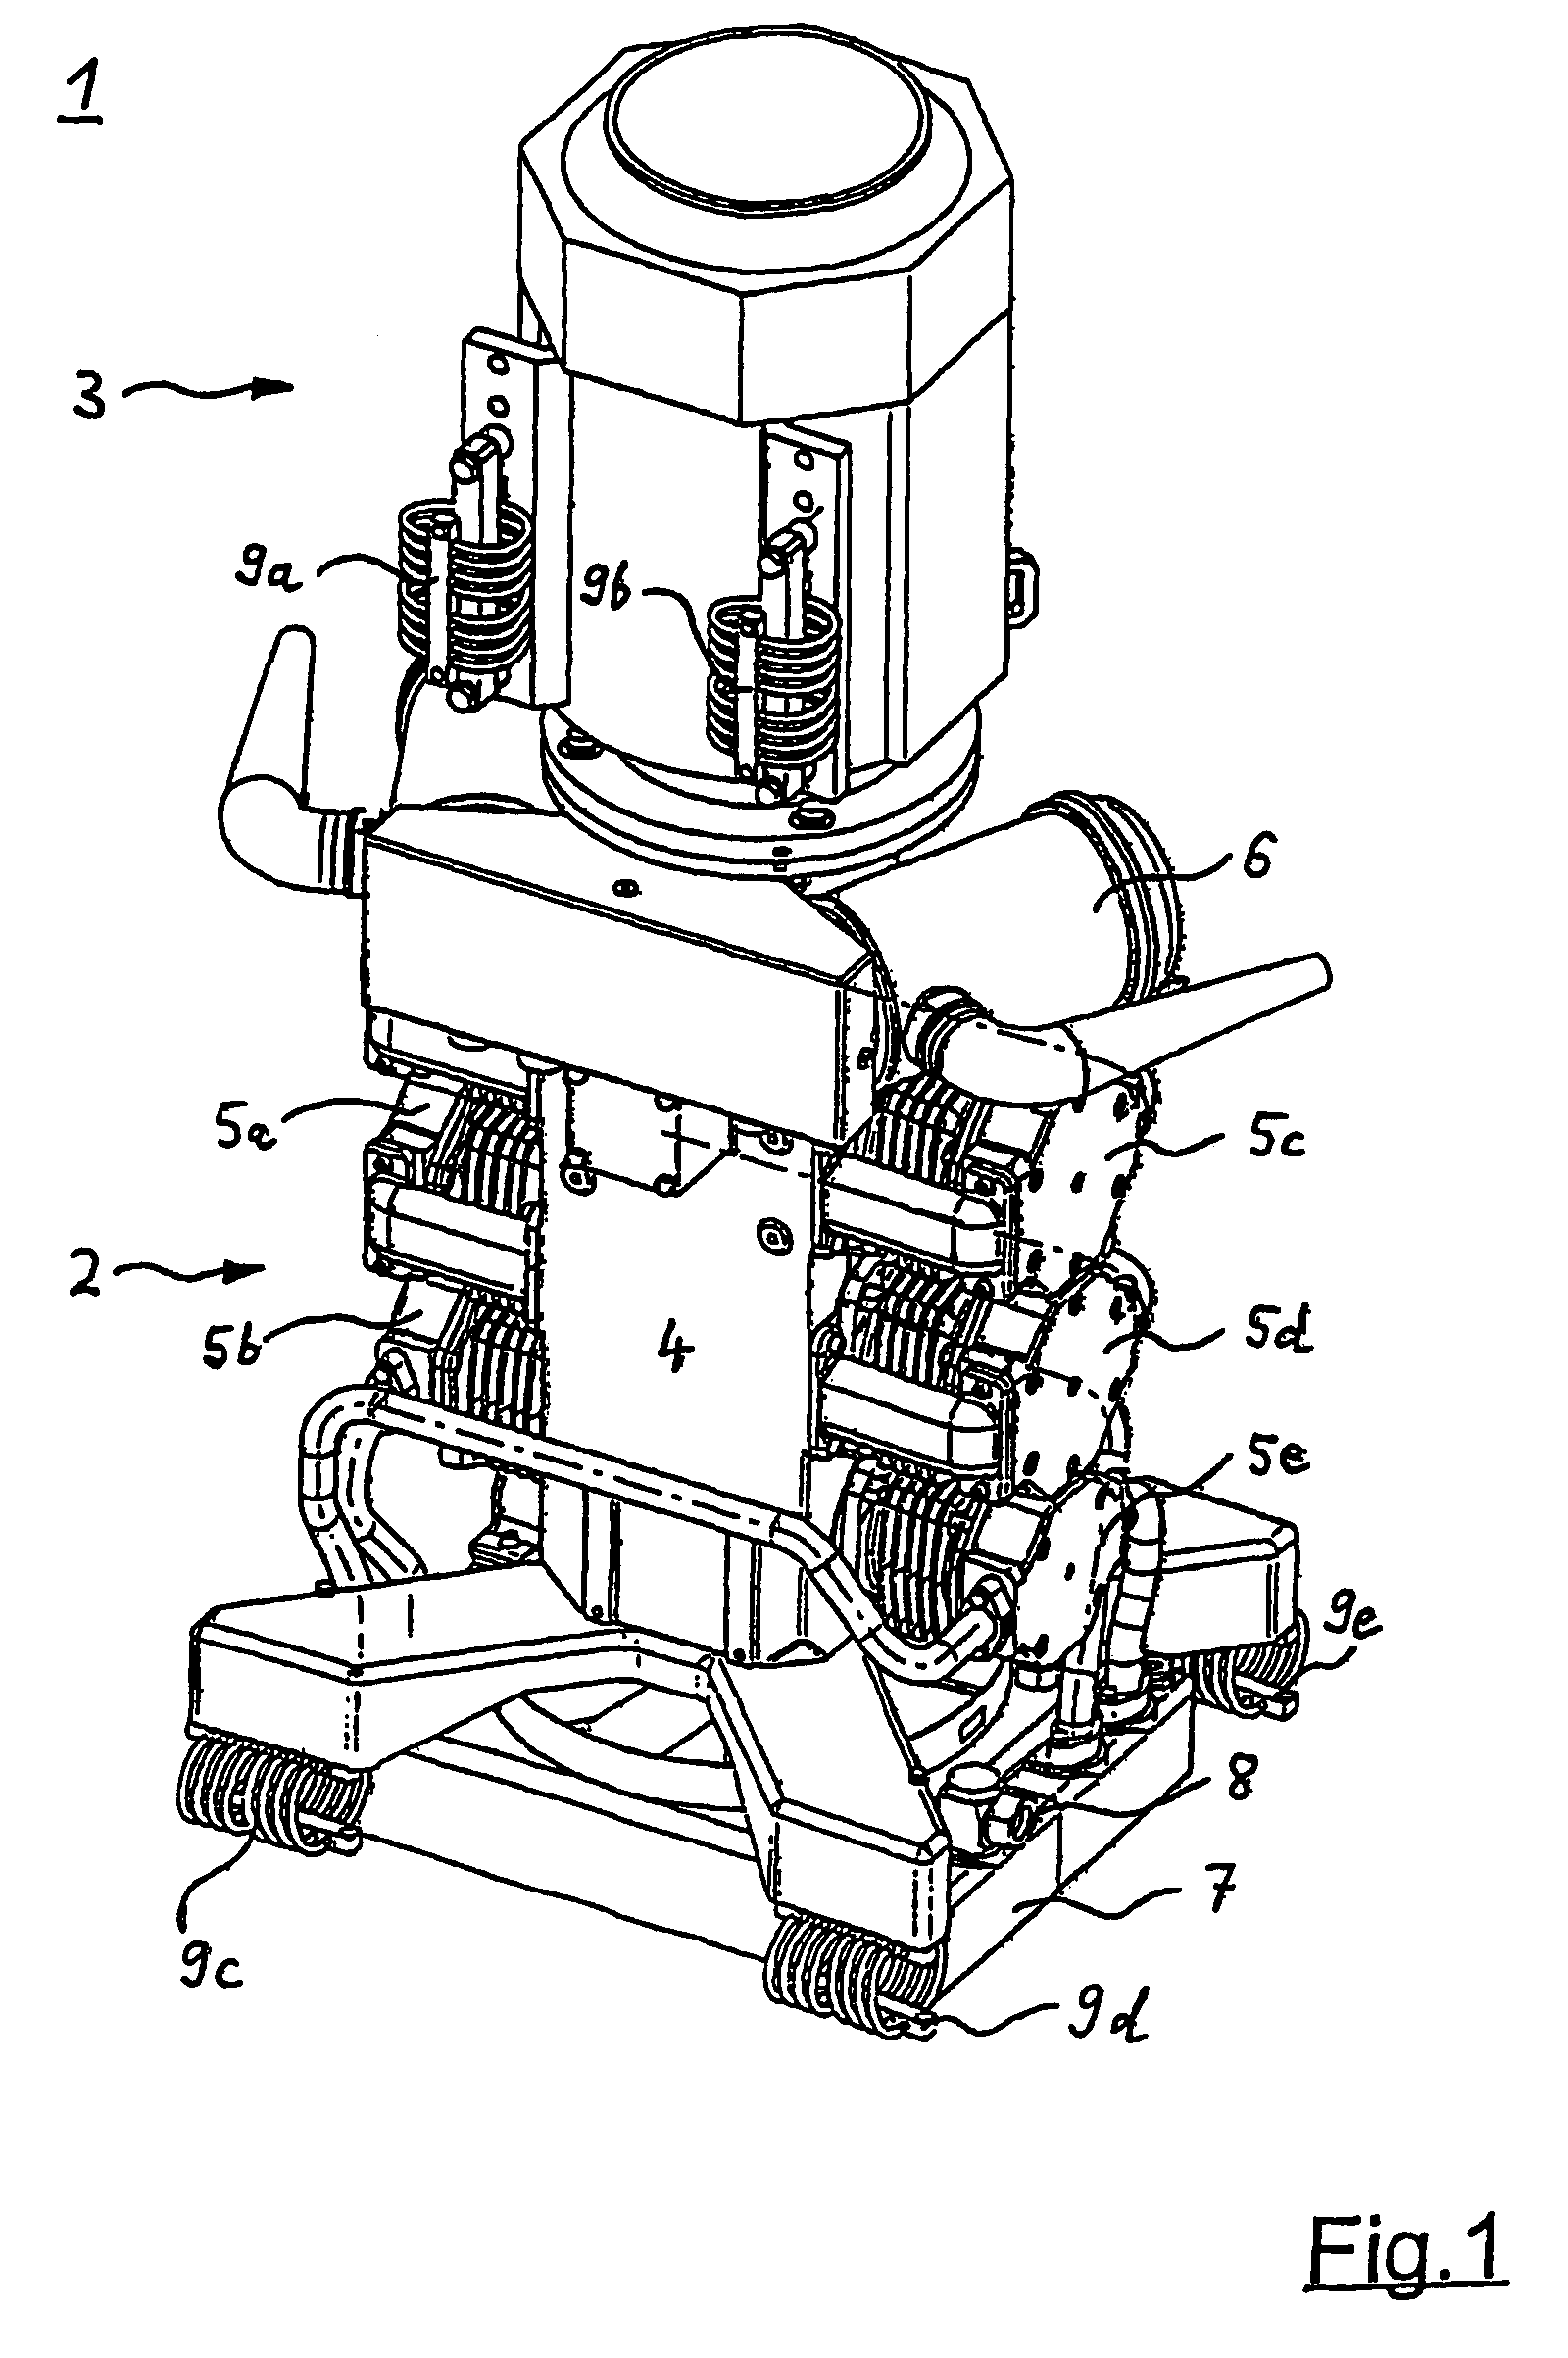 Structure of an oil-free compressor on a vehicle